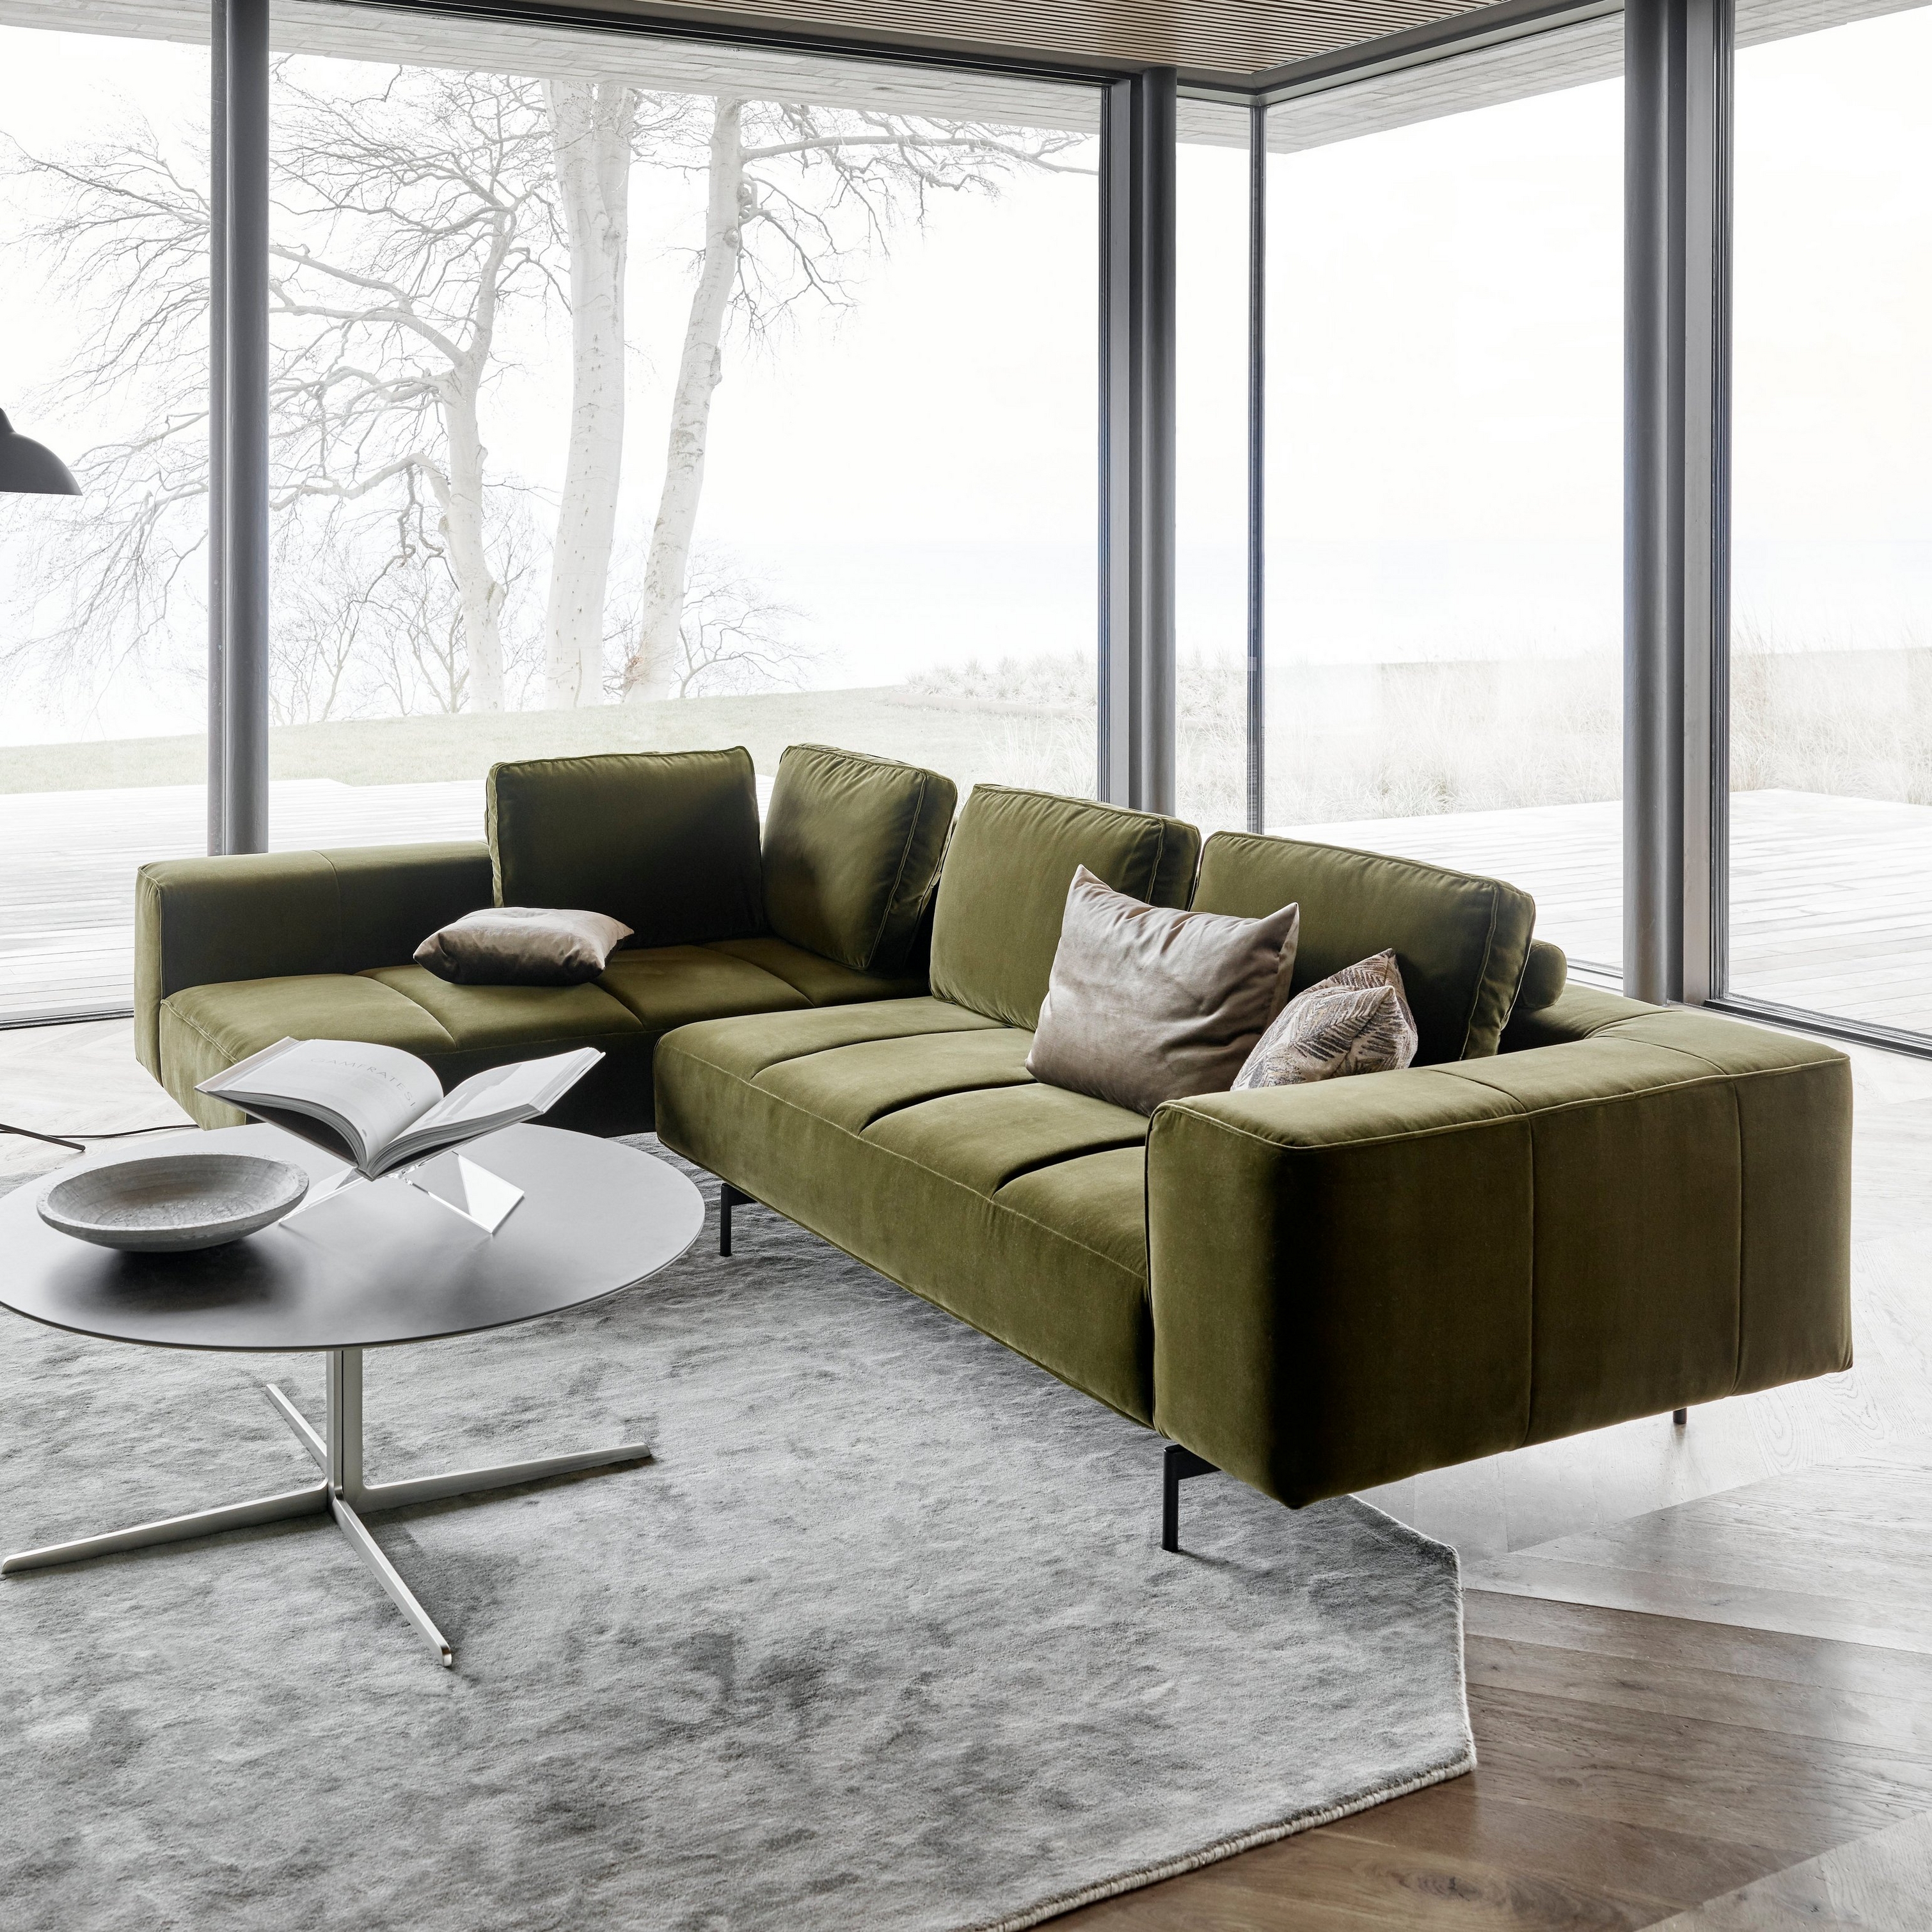 Modern green Amsterdam sofa, coffee table, floor lamp, by panoramic windows with a water view.